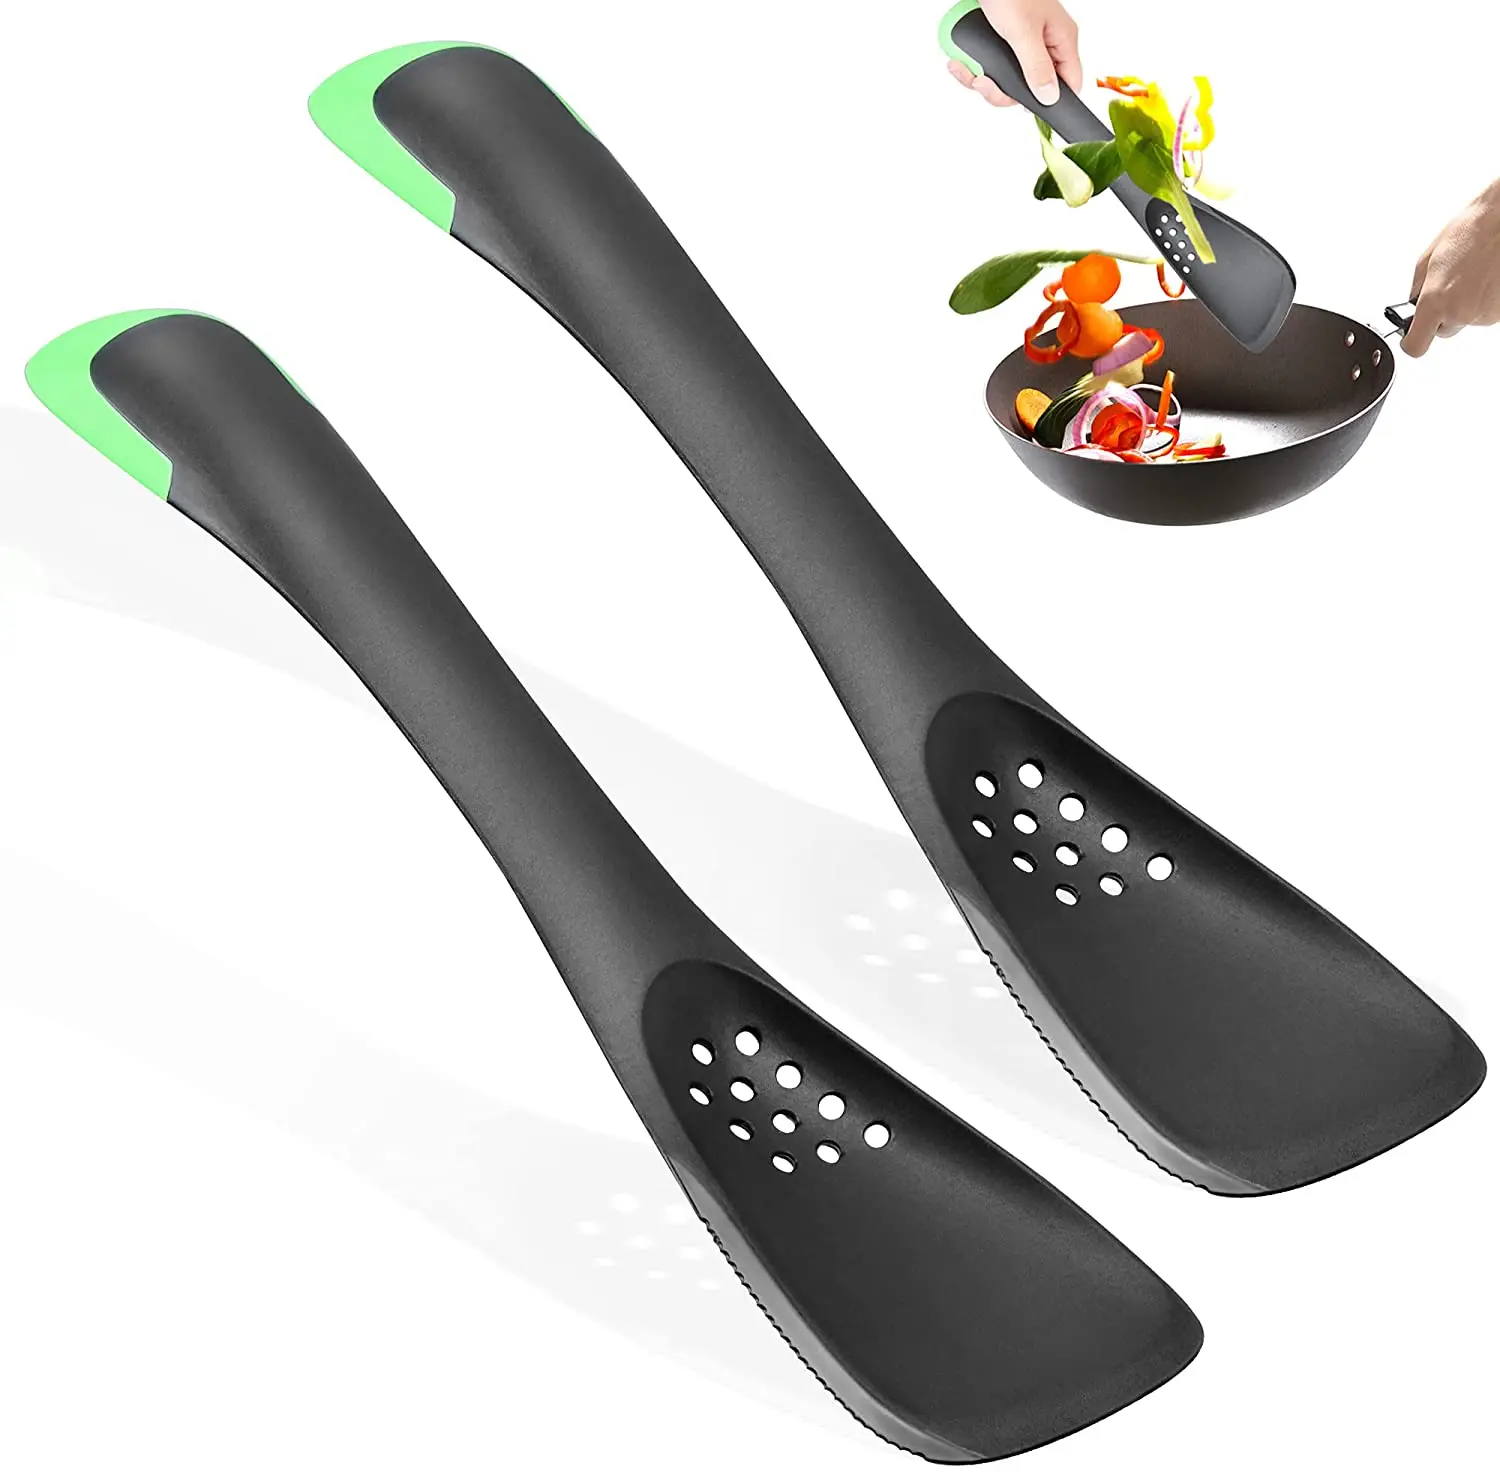 https://ae01.alicdn.com/kf/H1344ed450d214535a9a8ace085df4a6d3/5-In-1-Nylon-Slotted-Spoon-Spatula-Turner-Slicer-Solid-Spoon-Nonstick-Multipurpose-Kitchen-Tool-Included.jpg